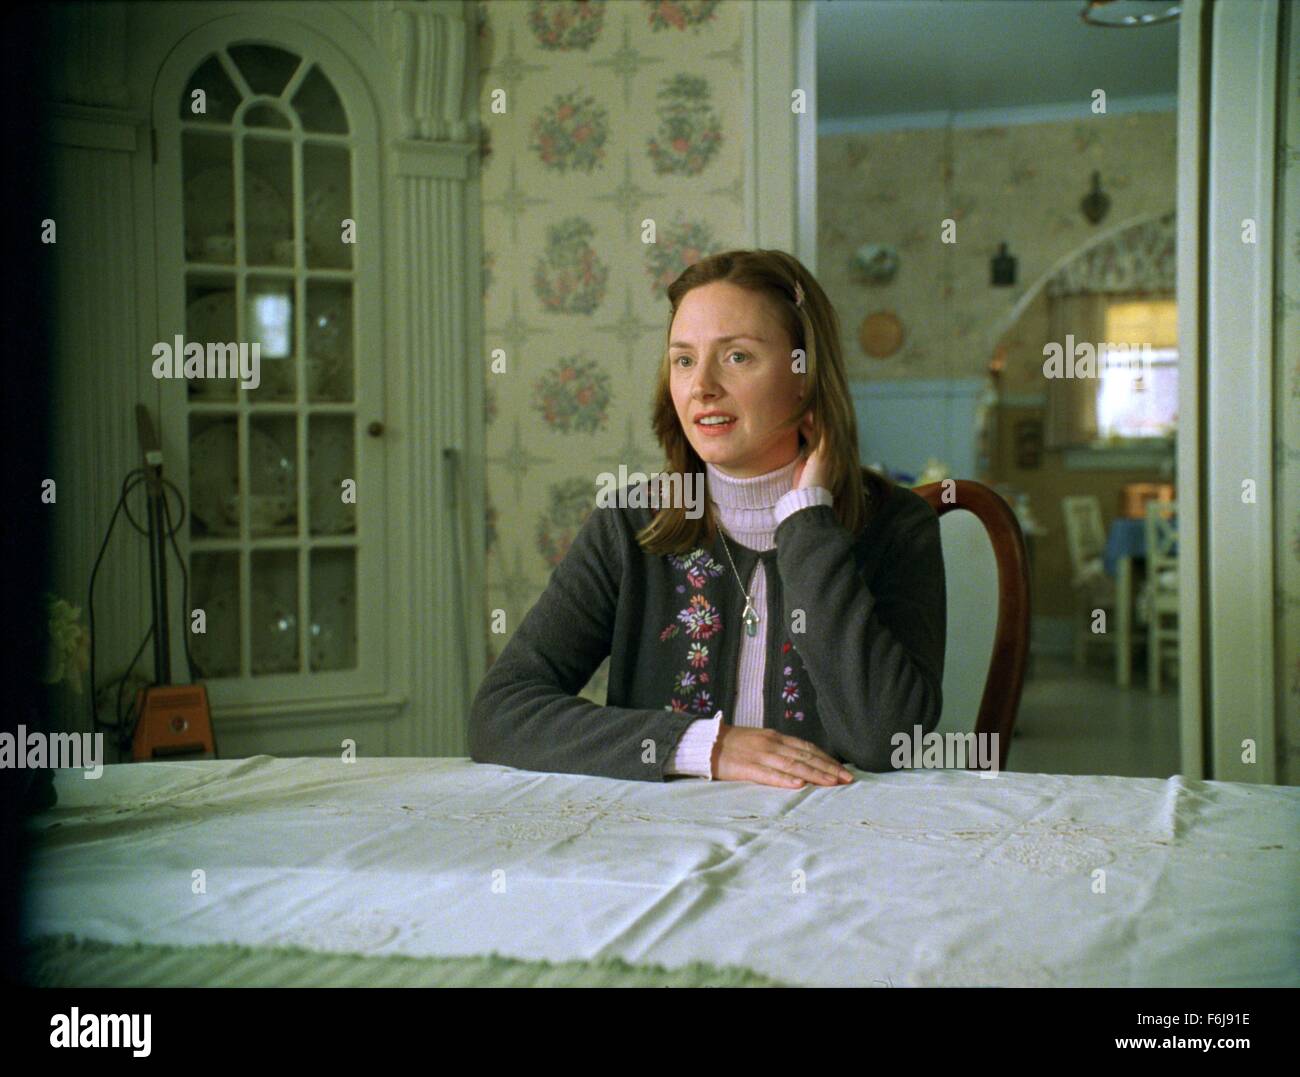 RELEASE DATE: September 27, 2002. MOVIE TITLE: About Schmidt. STUDIO: New Line Cinema. PLOT: A man upon retirement embarks on a journey to his estranged daughter's wedding only to discover more about himself and life than he ever expected. PICTURED:  HOPE DAVIS as Jeannie Schmidt. Stock Photo